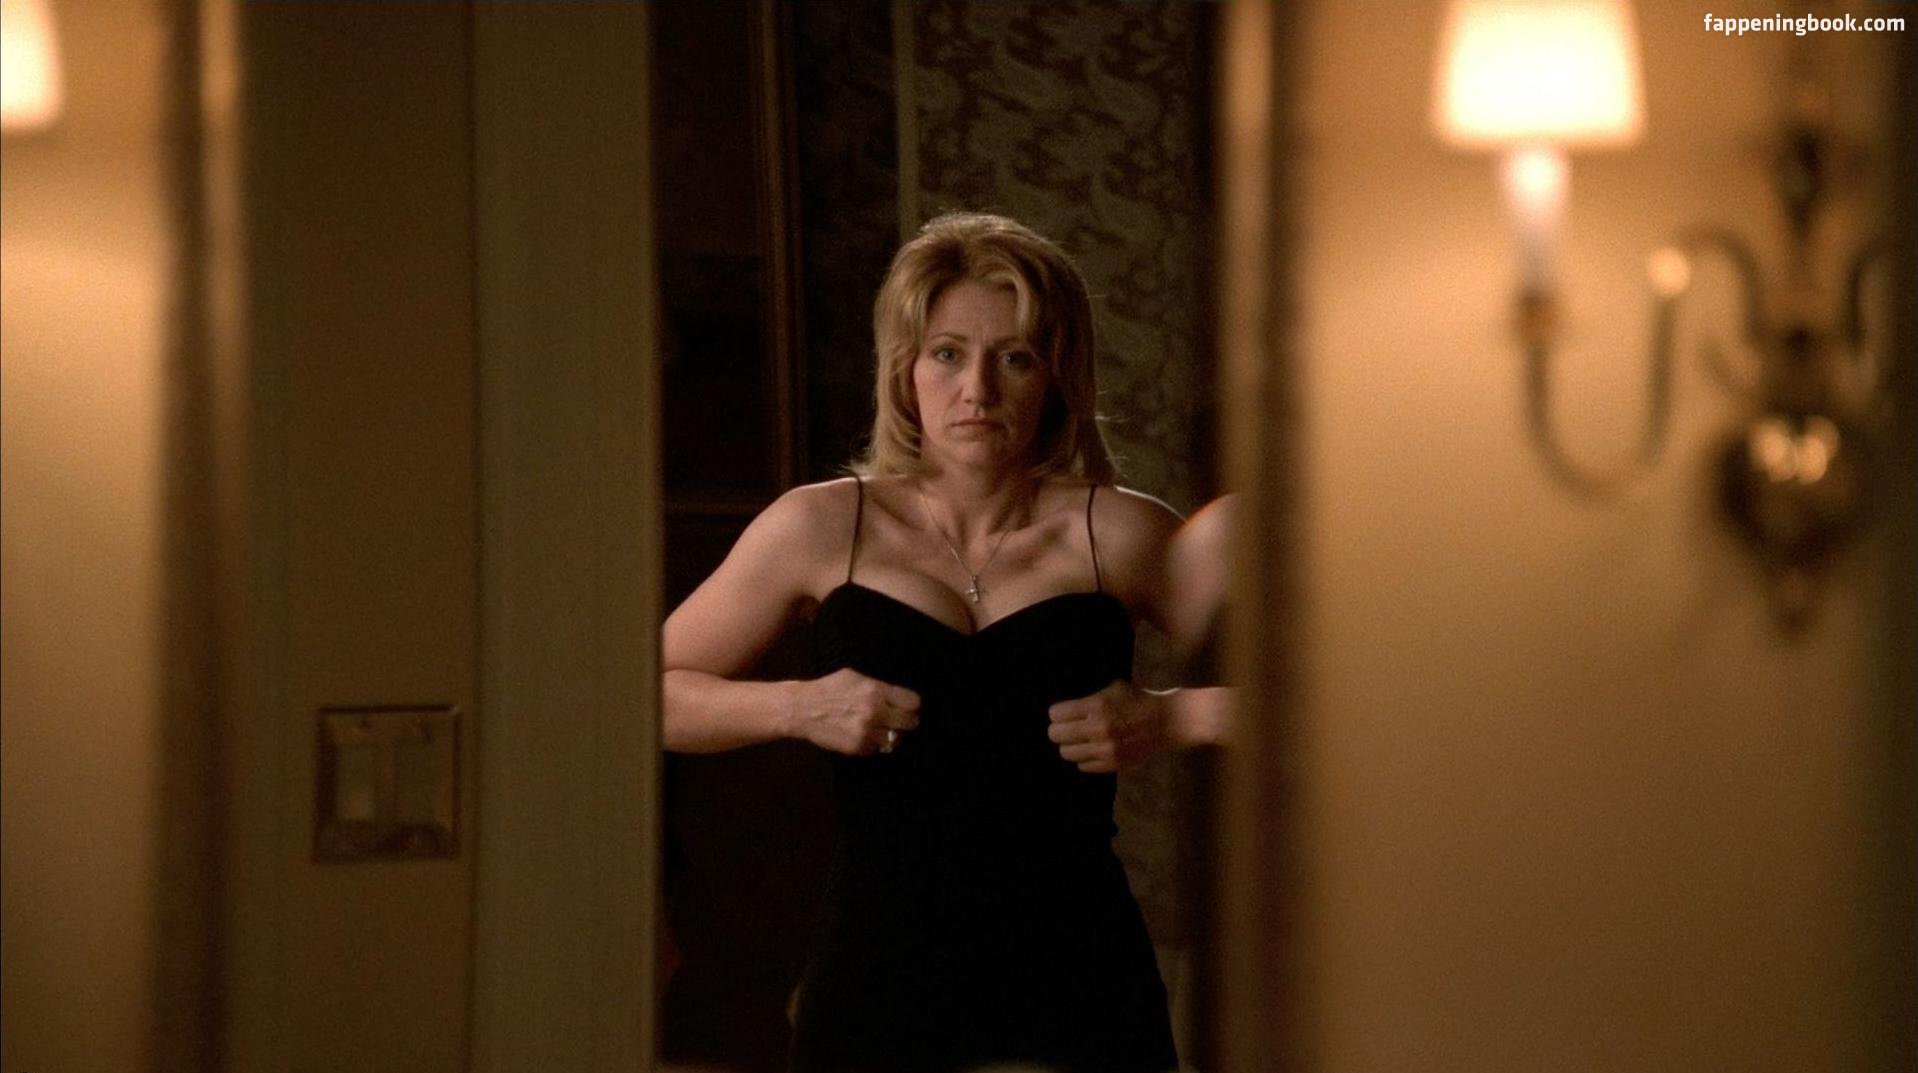 Edie Falco Nude, The Fappening - Photo #153886 - FappeningBook.